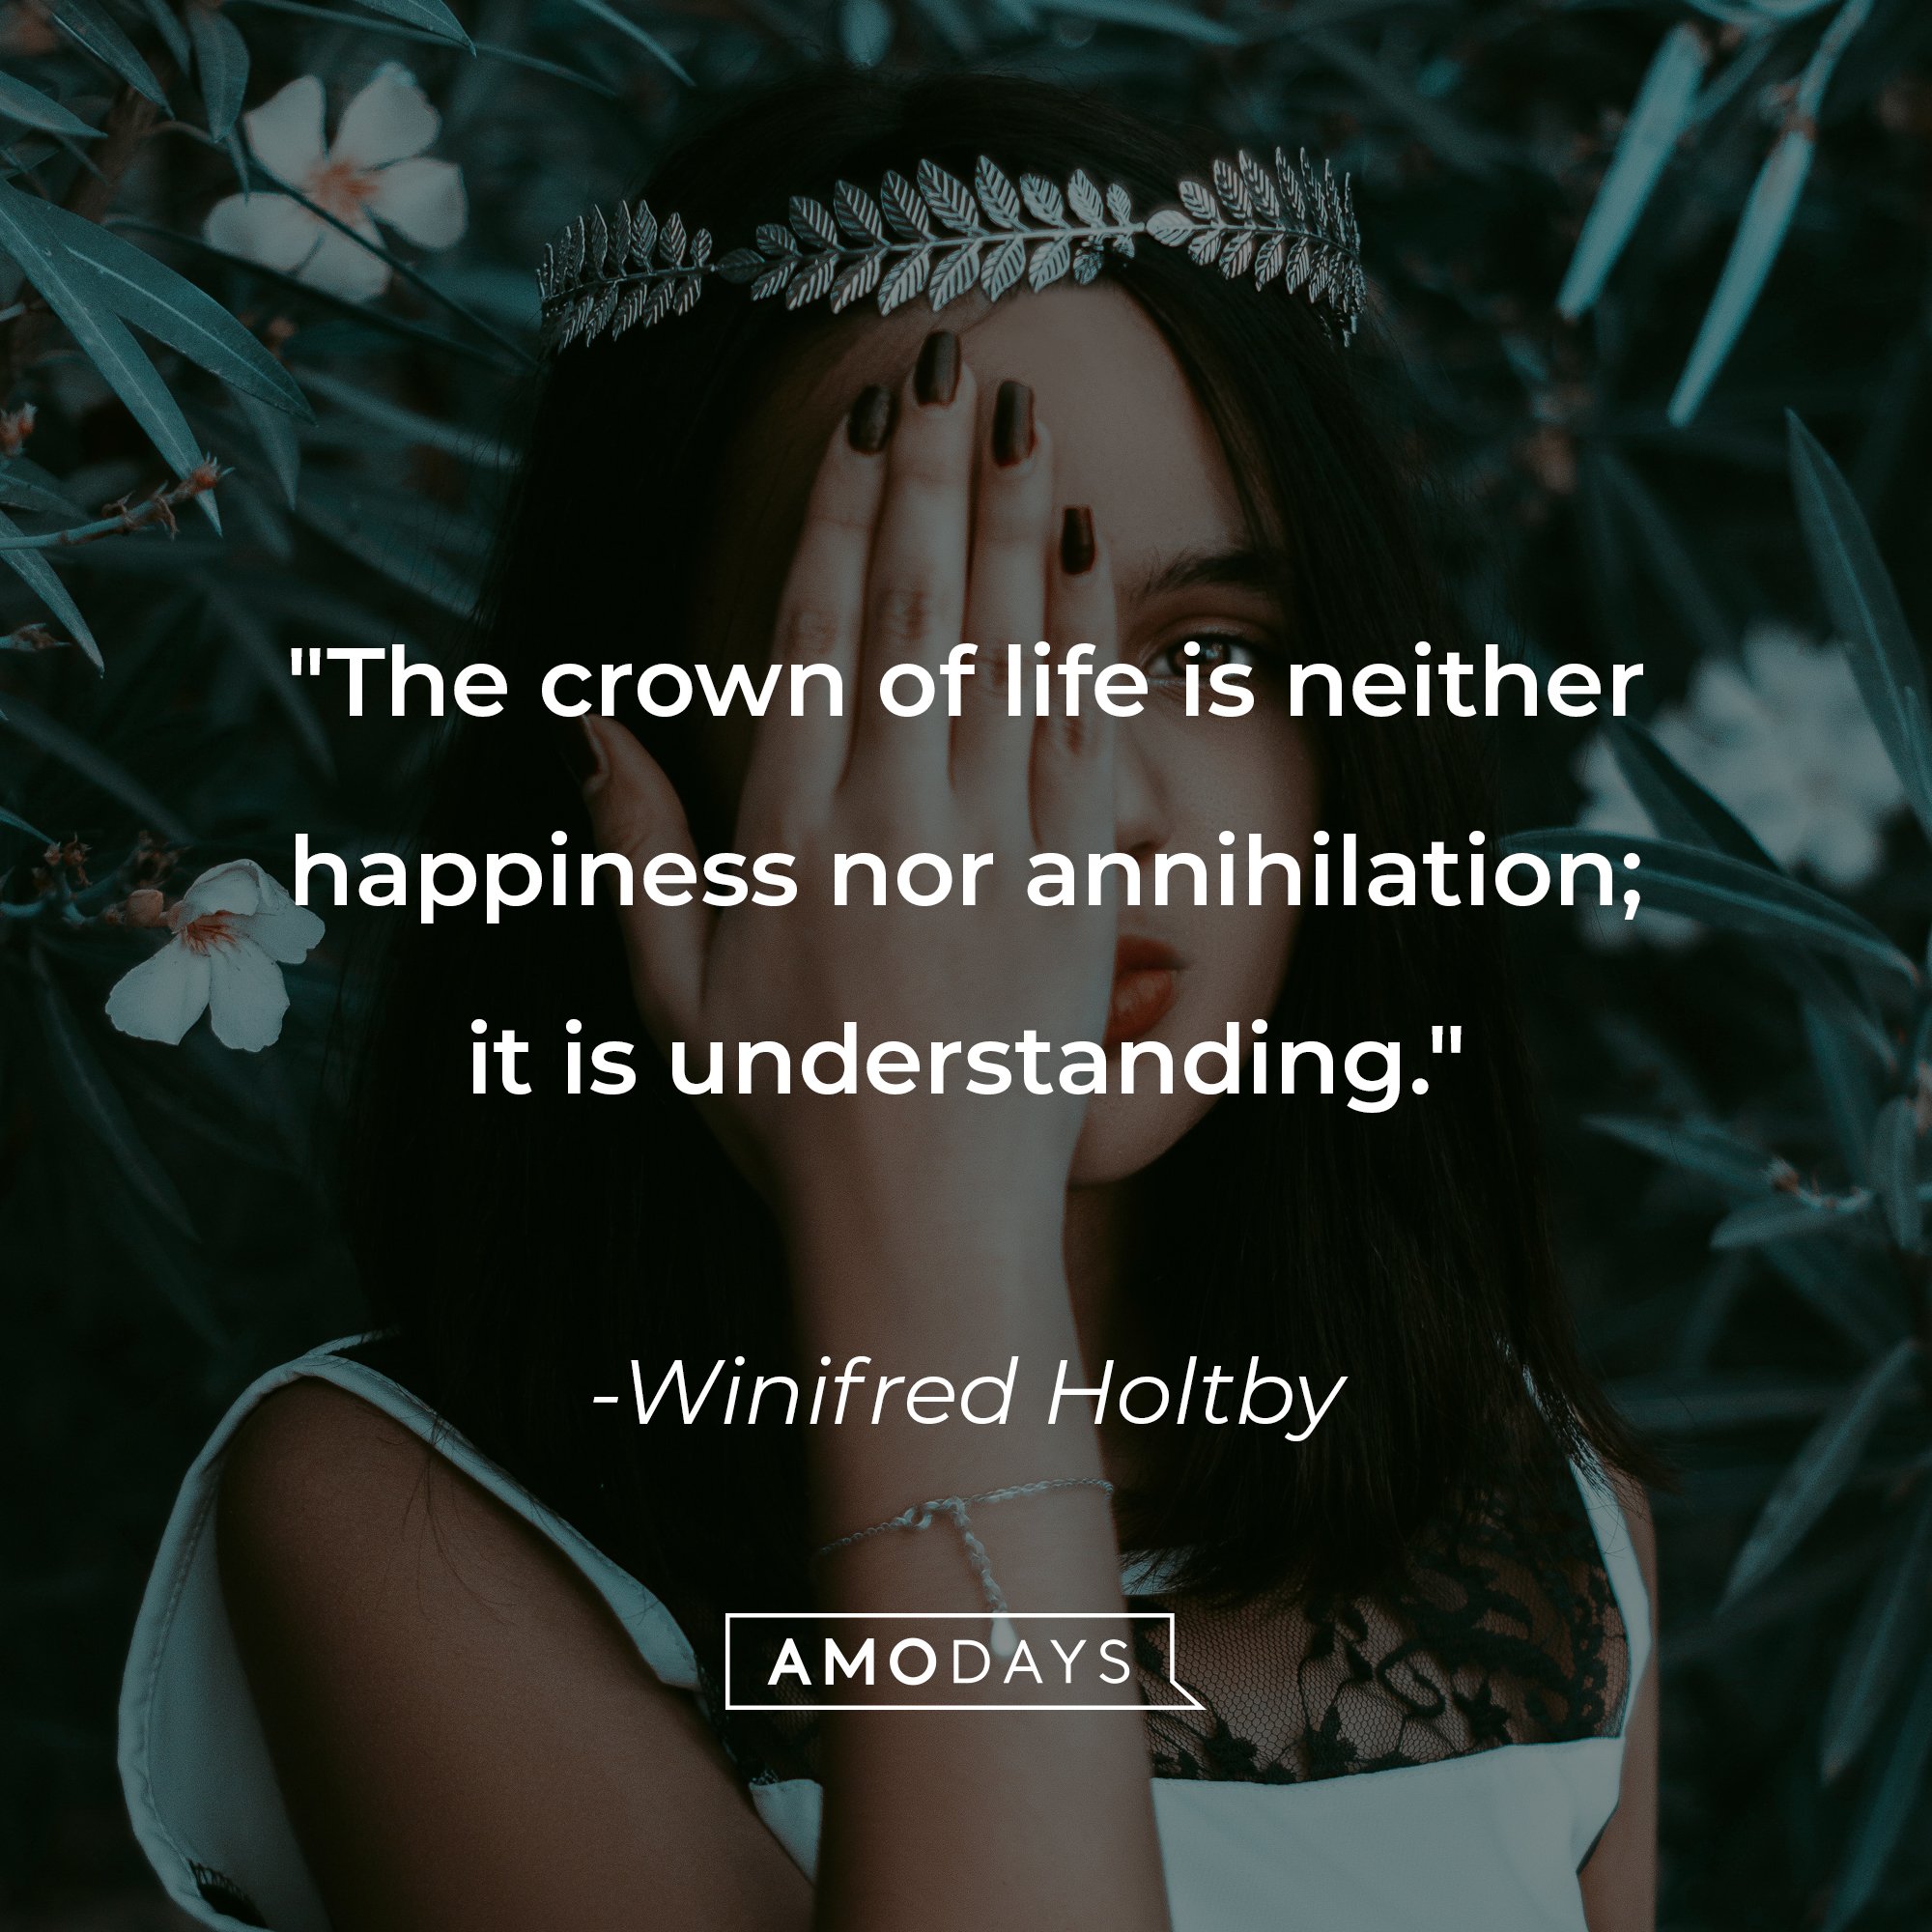 Winifred Holtby's quote: "The crown of life is neither happiness nor annihilation; it is understanding." | Image: AmoDays